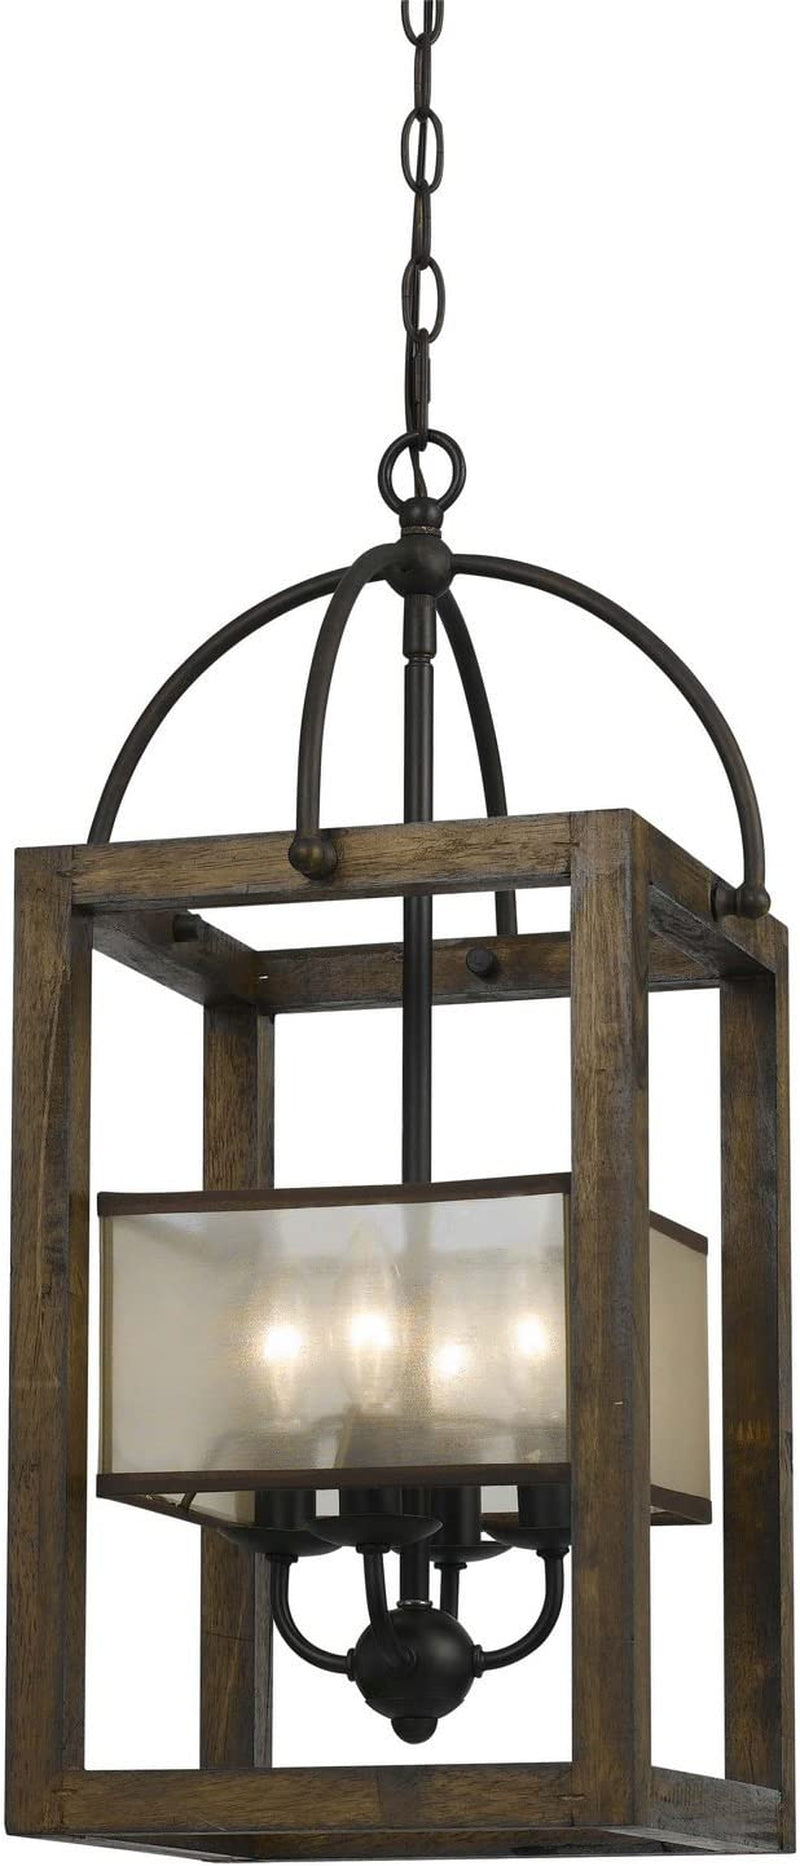 B00BL2YZ7A Cal Lighting FX-3536/4 Mission Wood/Metal Four Light Transitional Style Chandelier, Dark Bronze